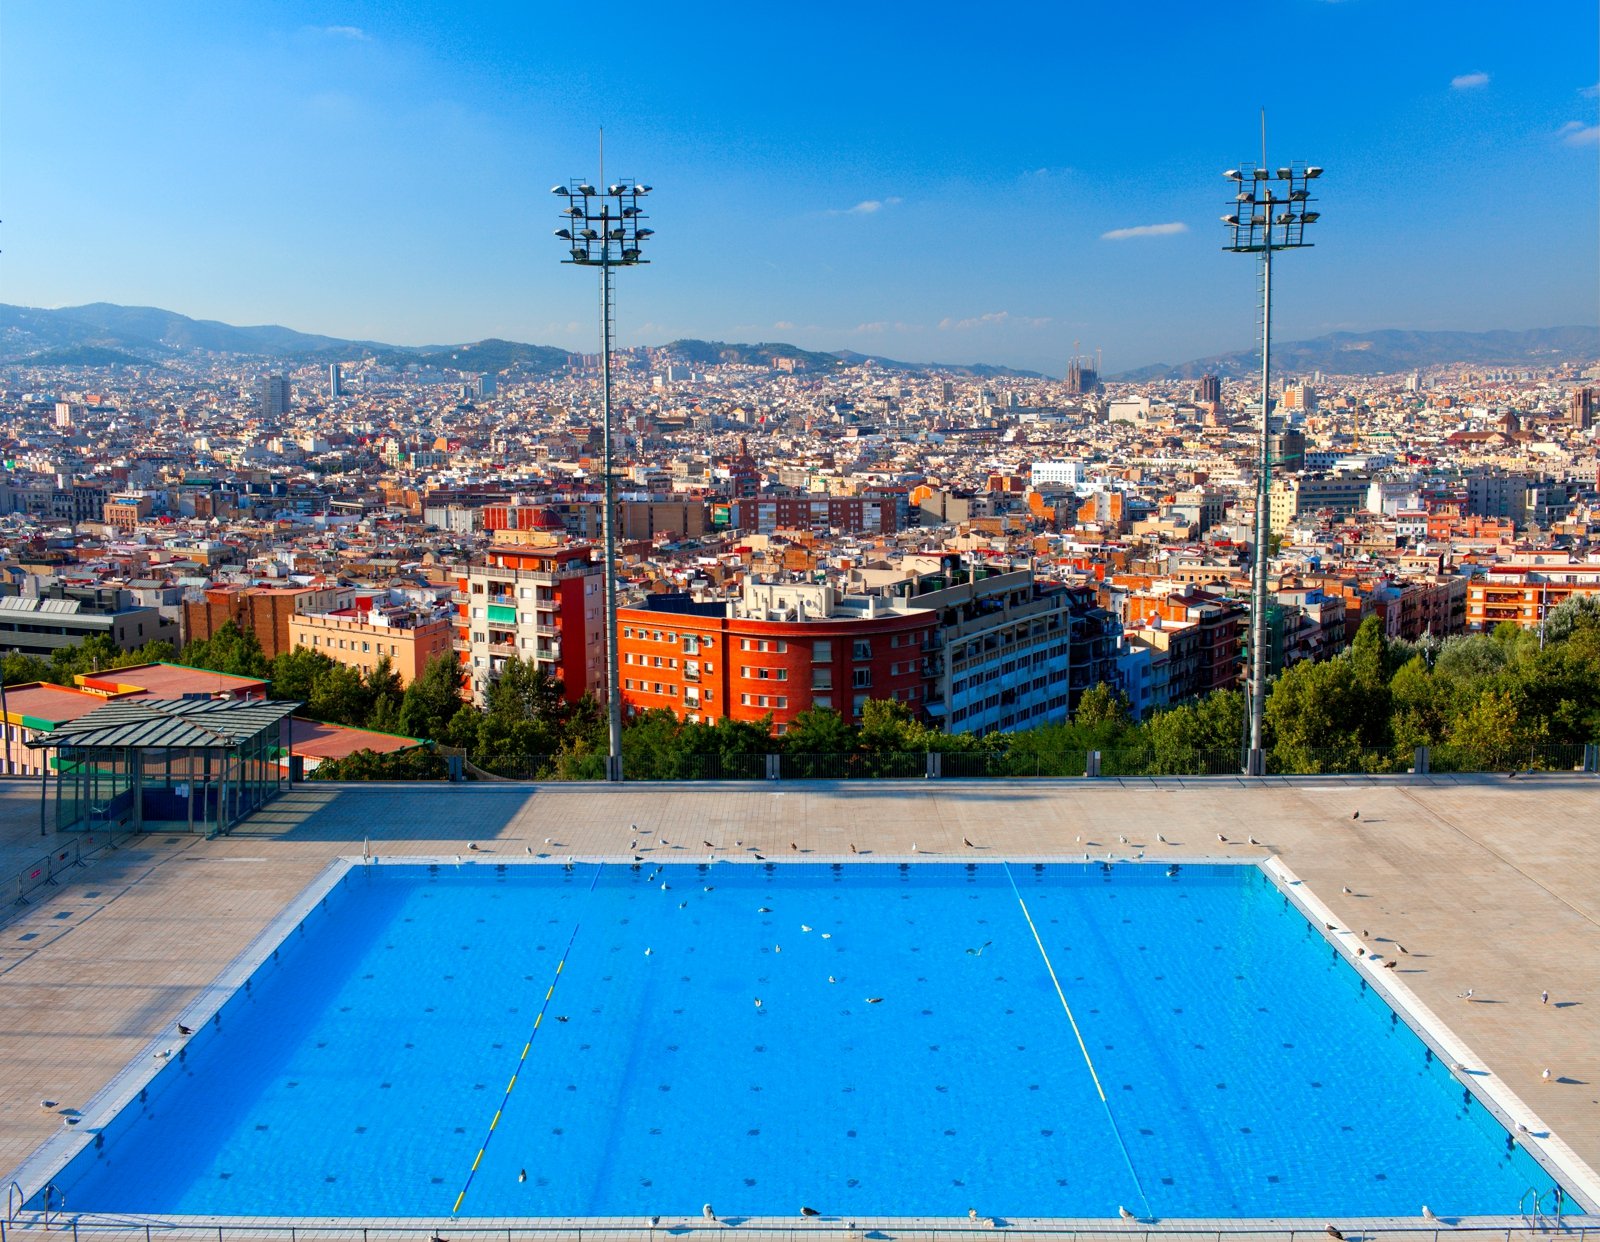 How to take a swim in the pool with views of the city in Barcelona